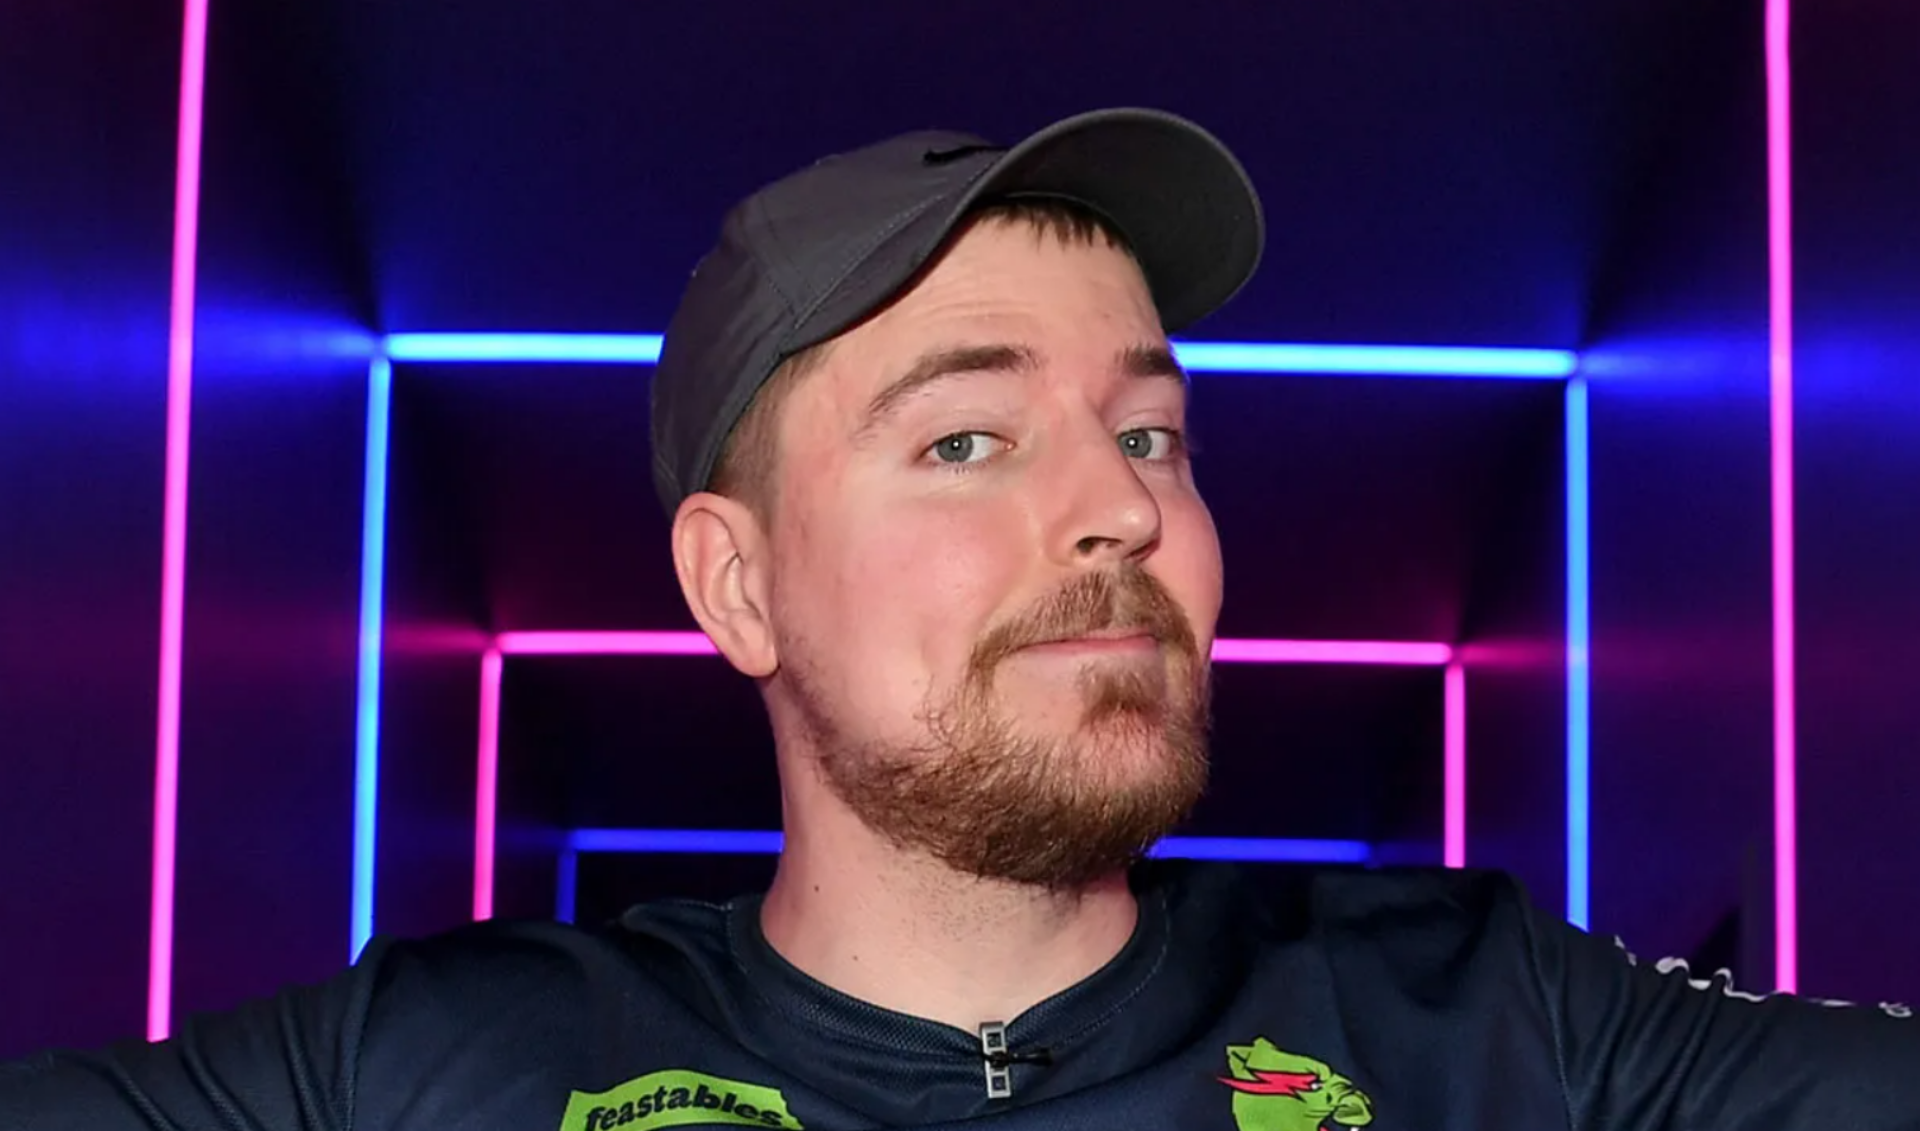 MrBeast lands deal with Amazon to produce TV series with 1,000 contestants and a $5 million prize